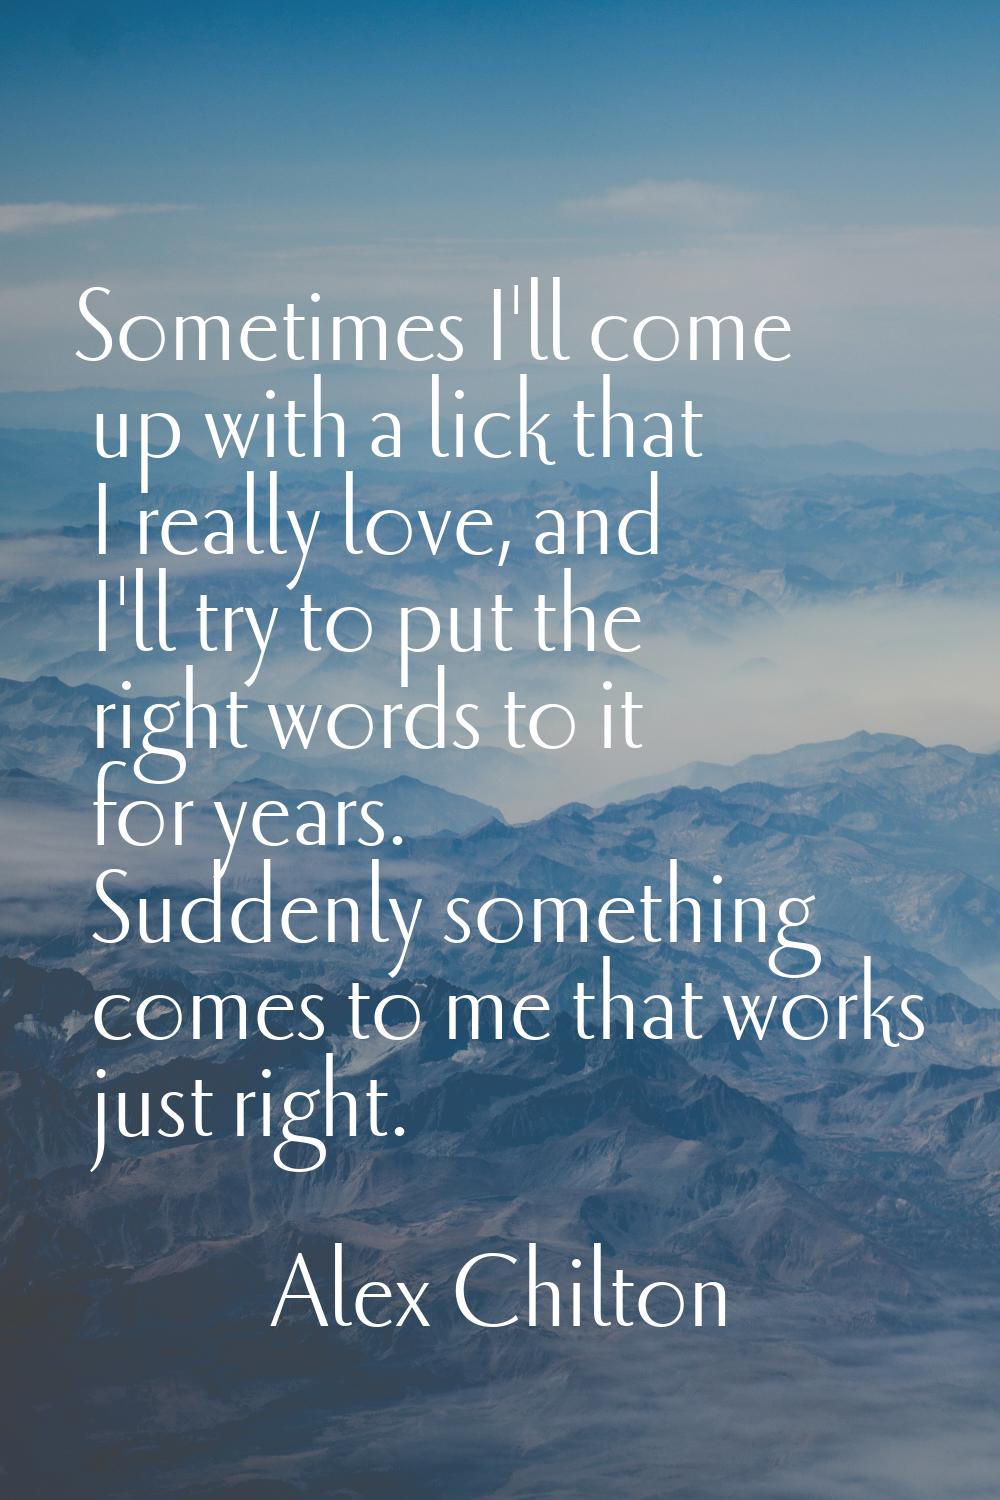 Sometimes I'll come up with a lick that I really love, and I'll try to put the right words to it fo